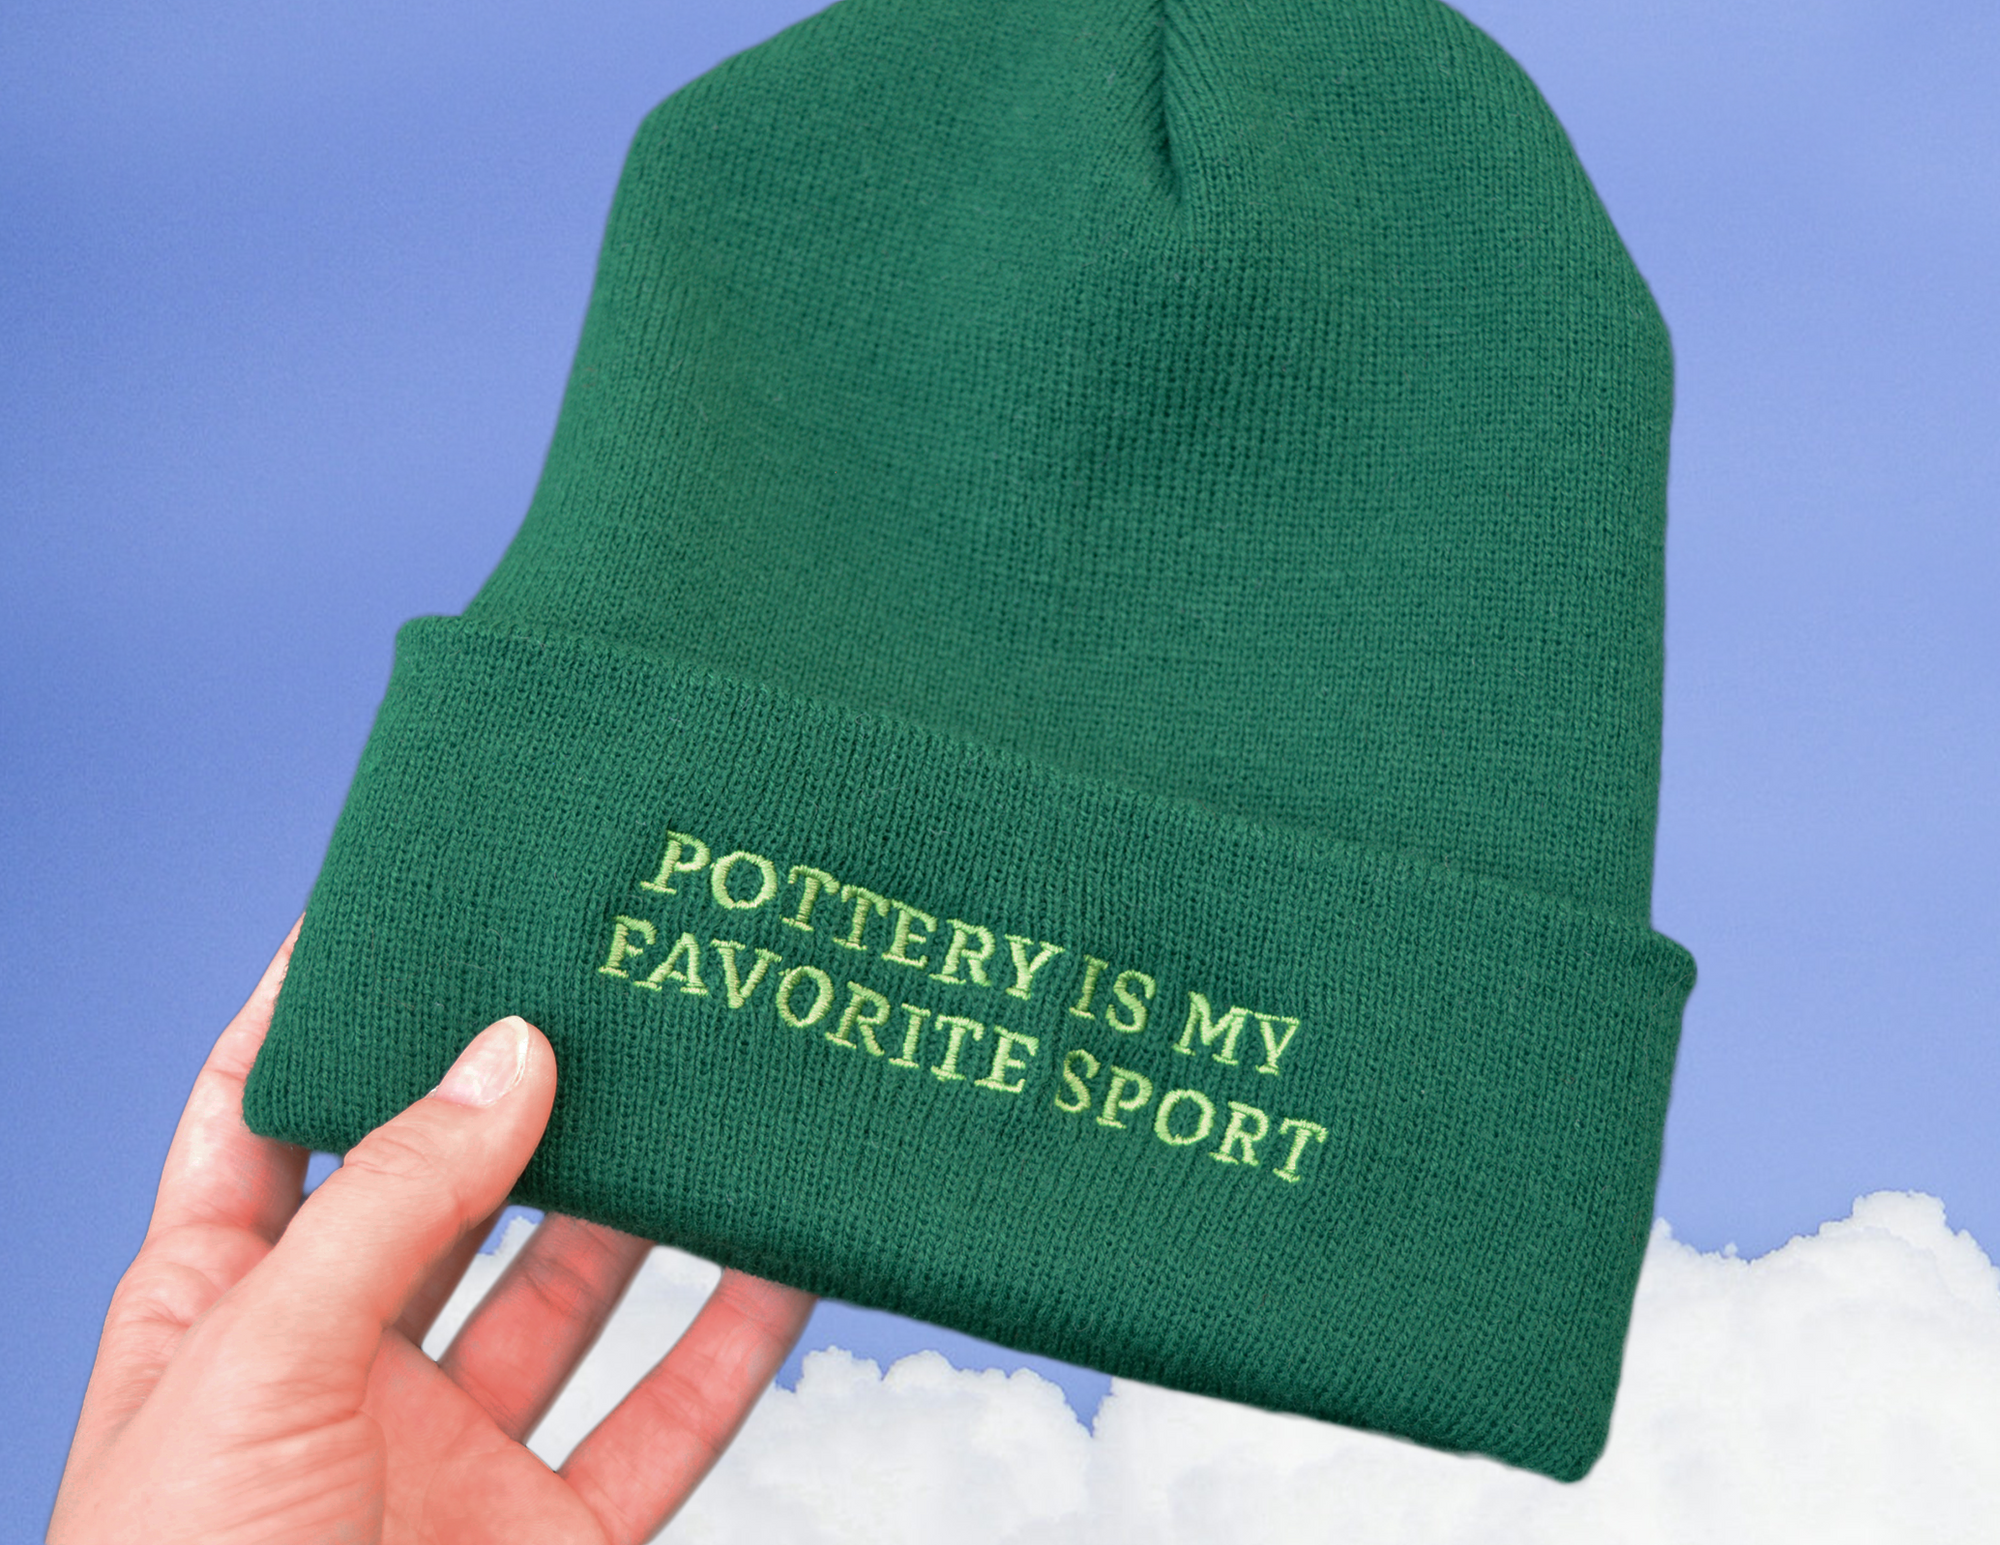 Pottery Is My Favorite Sport Beanie - Green